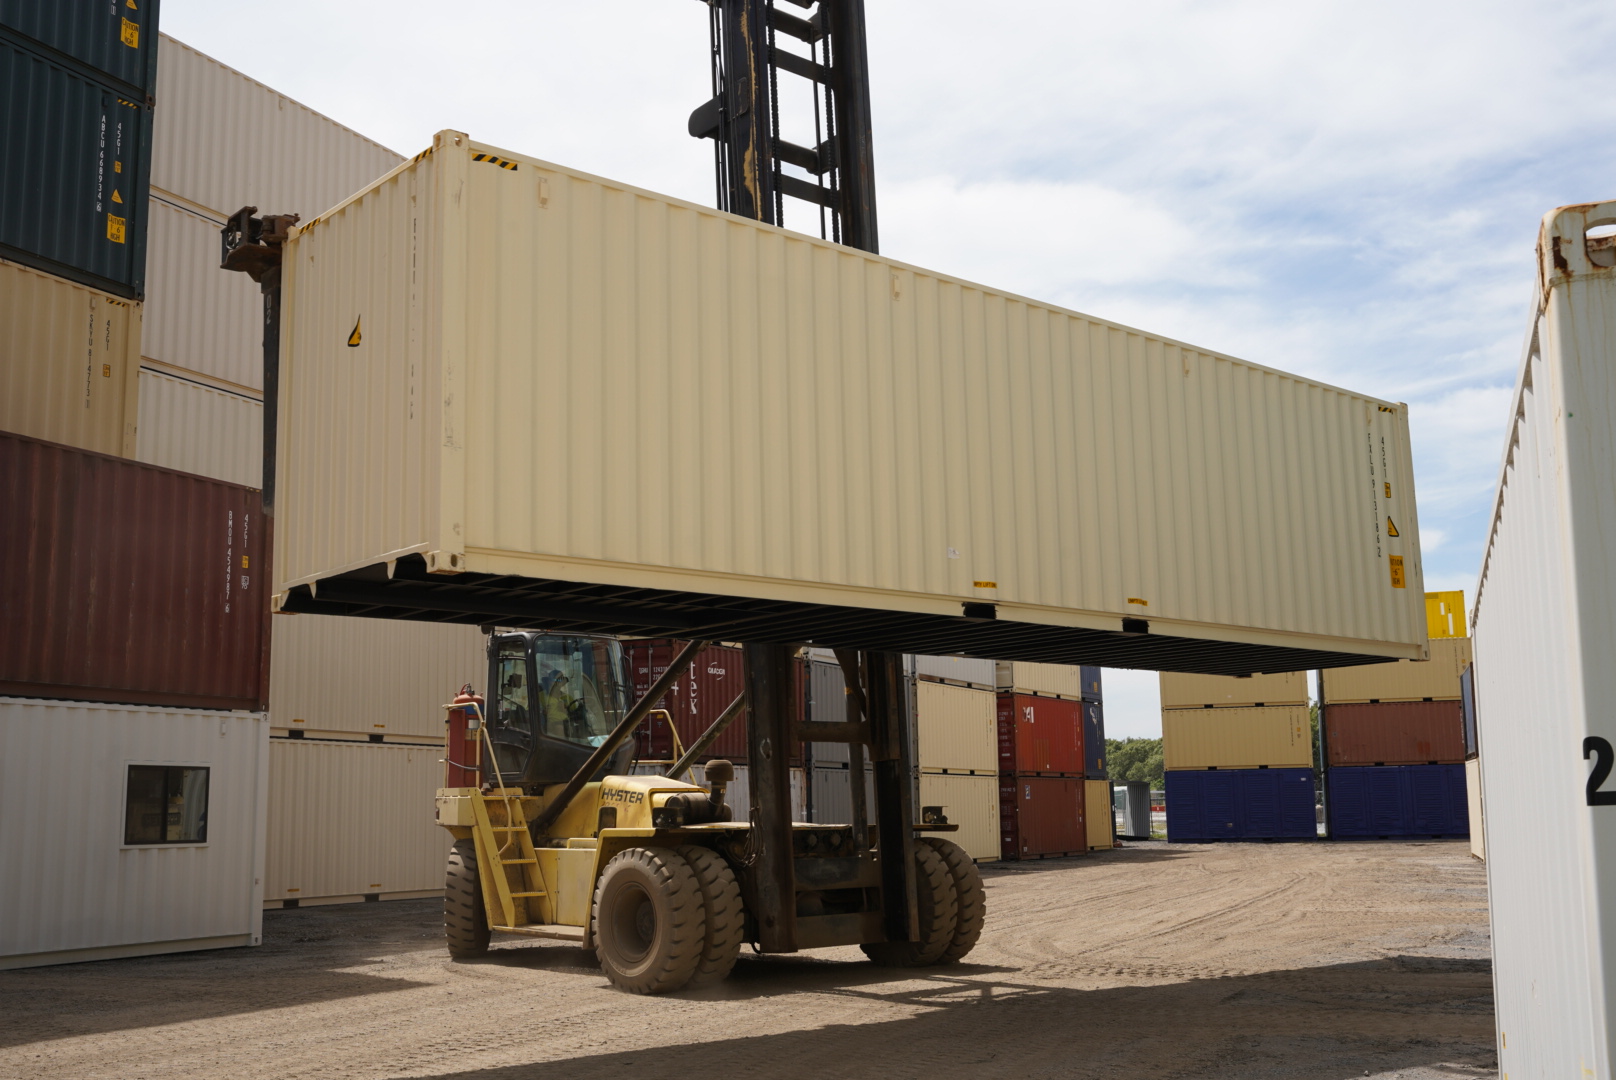 40ft shipping container being lifted by a forklift